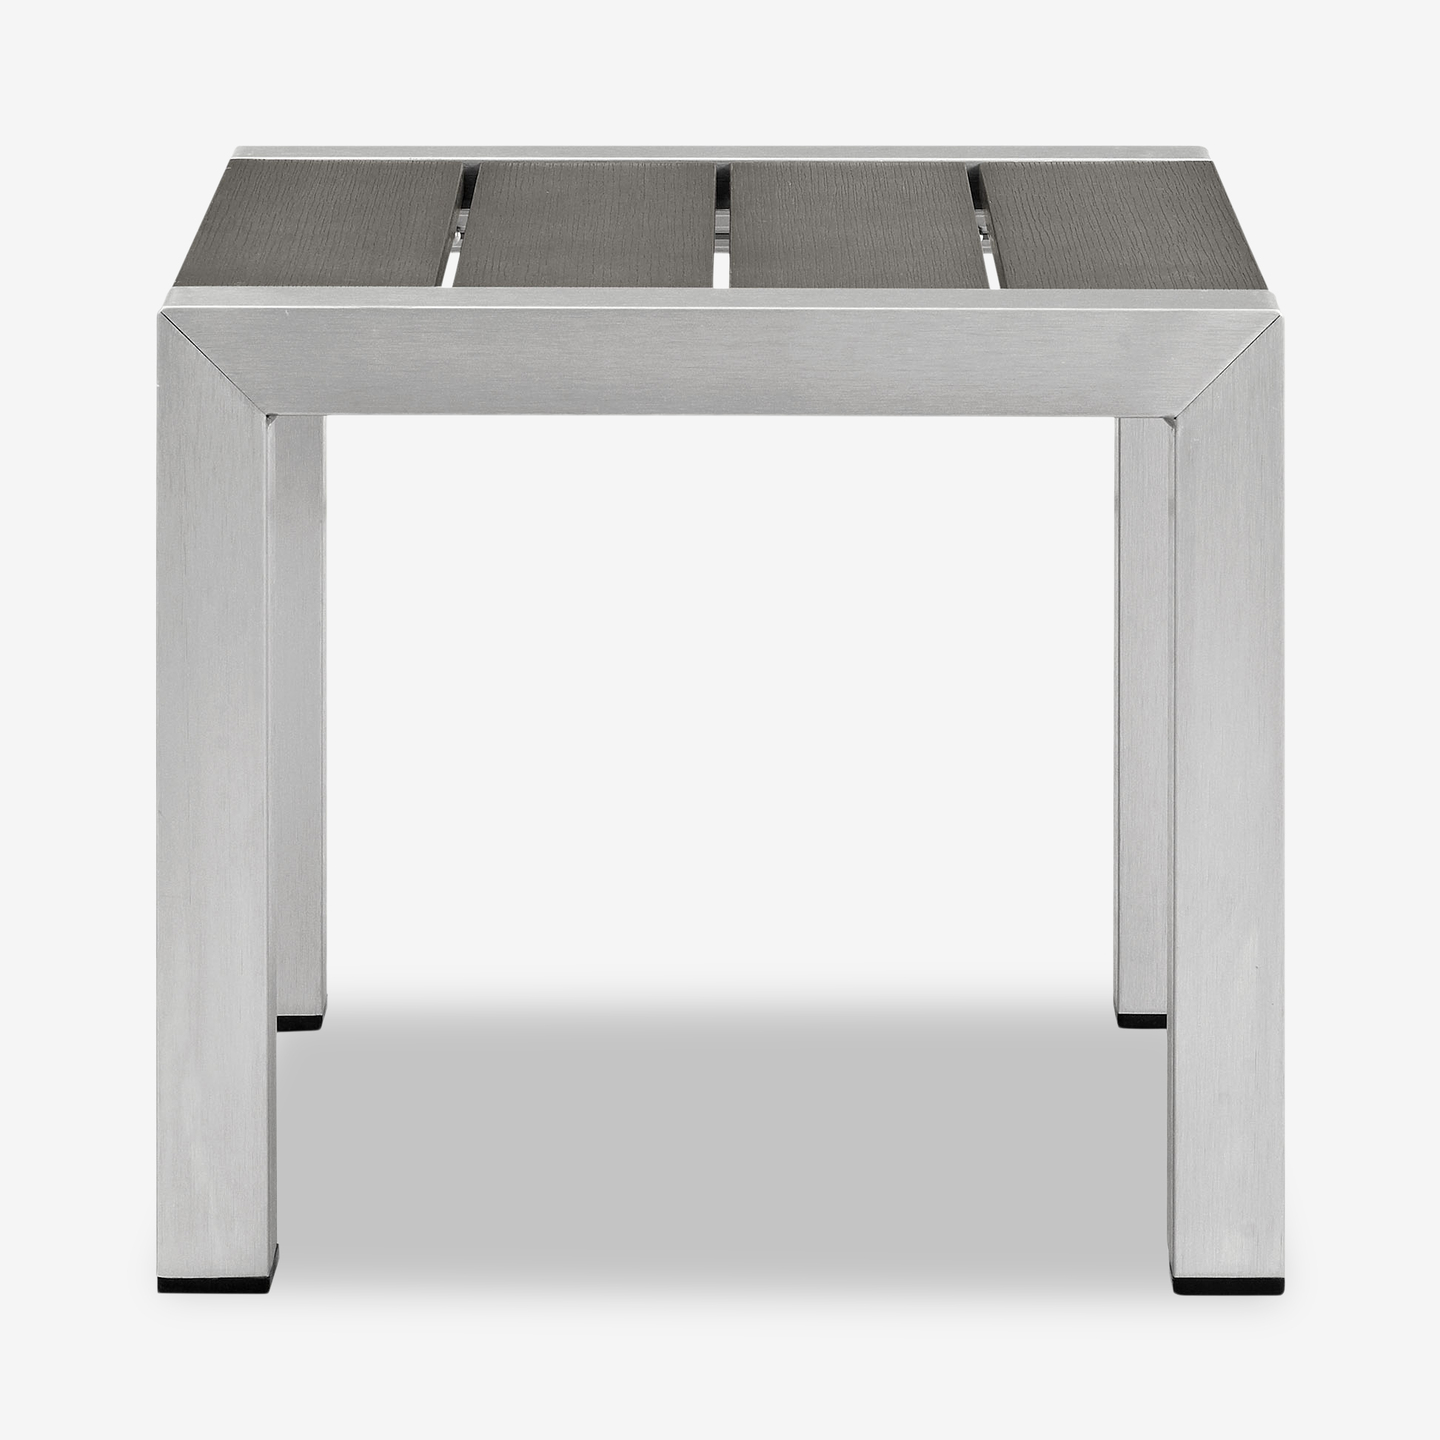 1233_Breeze-Outdoor-Patio-Side-Table_Front_2021